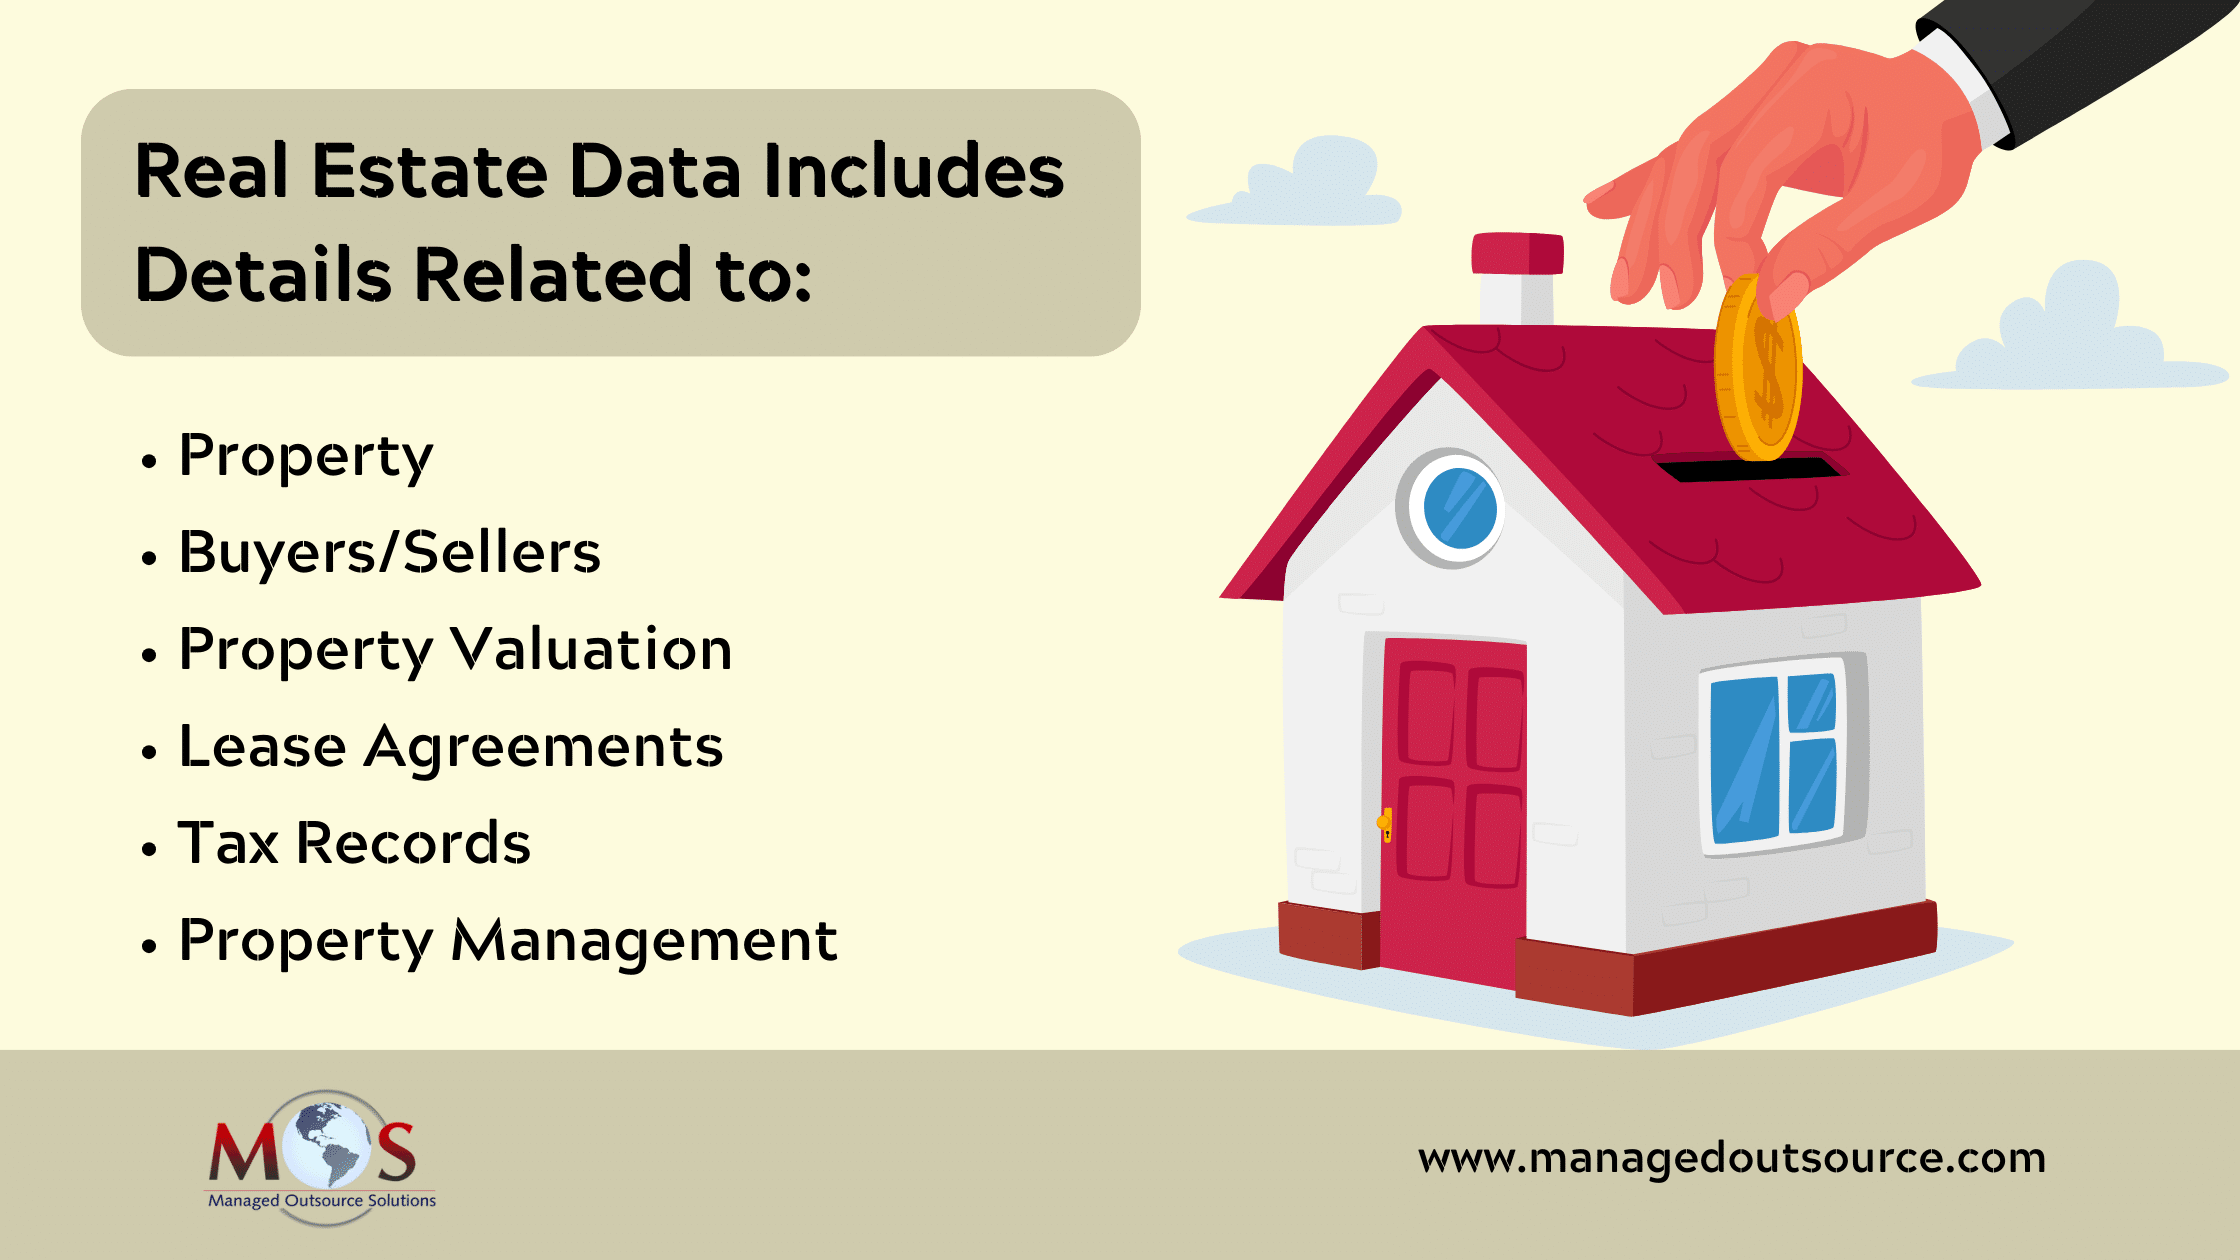 Real Estate Data Includes Details Related to